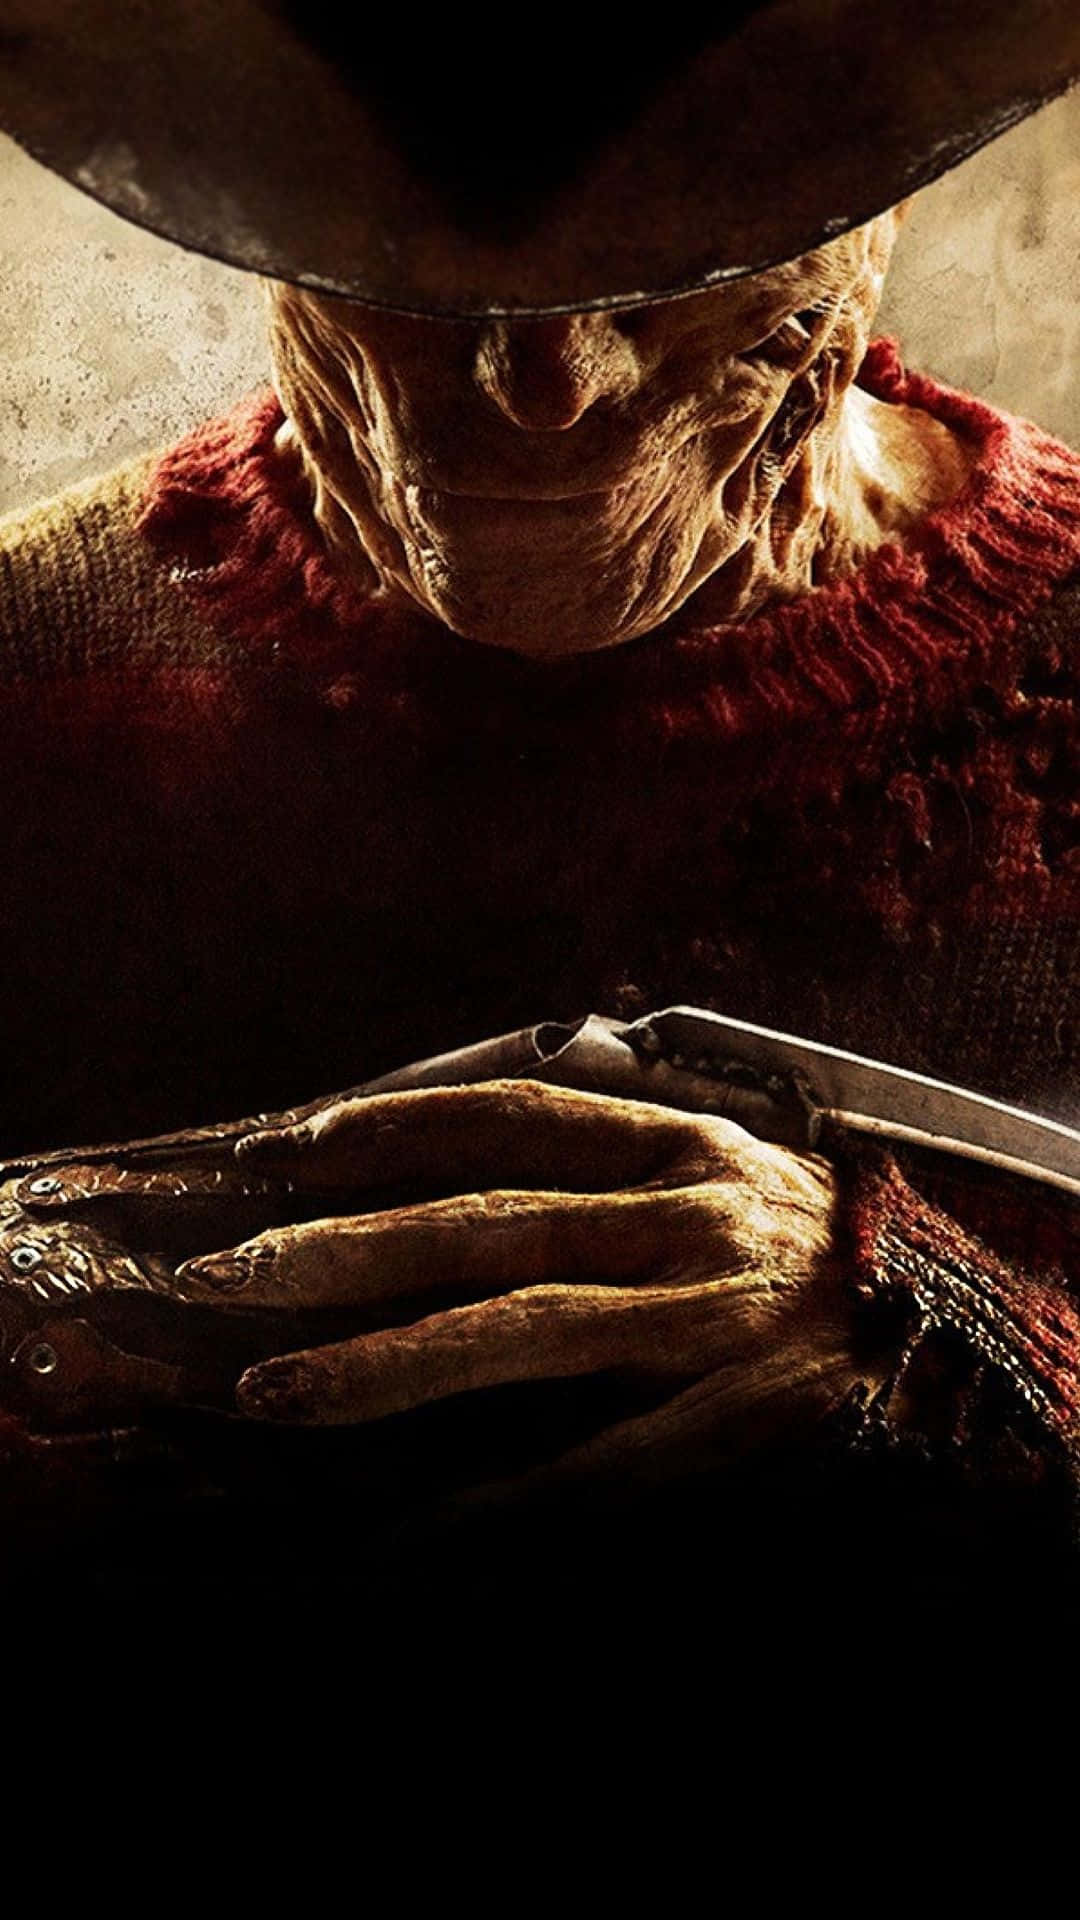 A Poster For The Movie Freddy Krueger